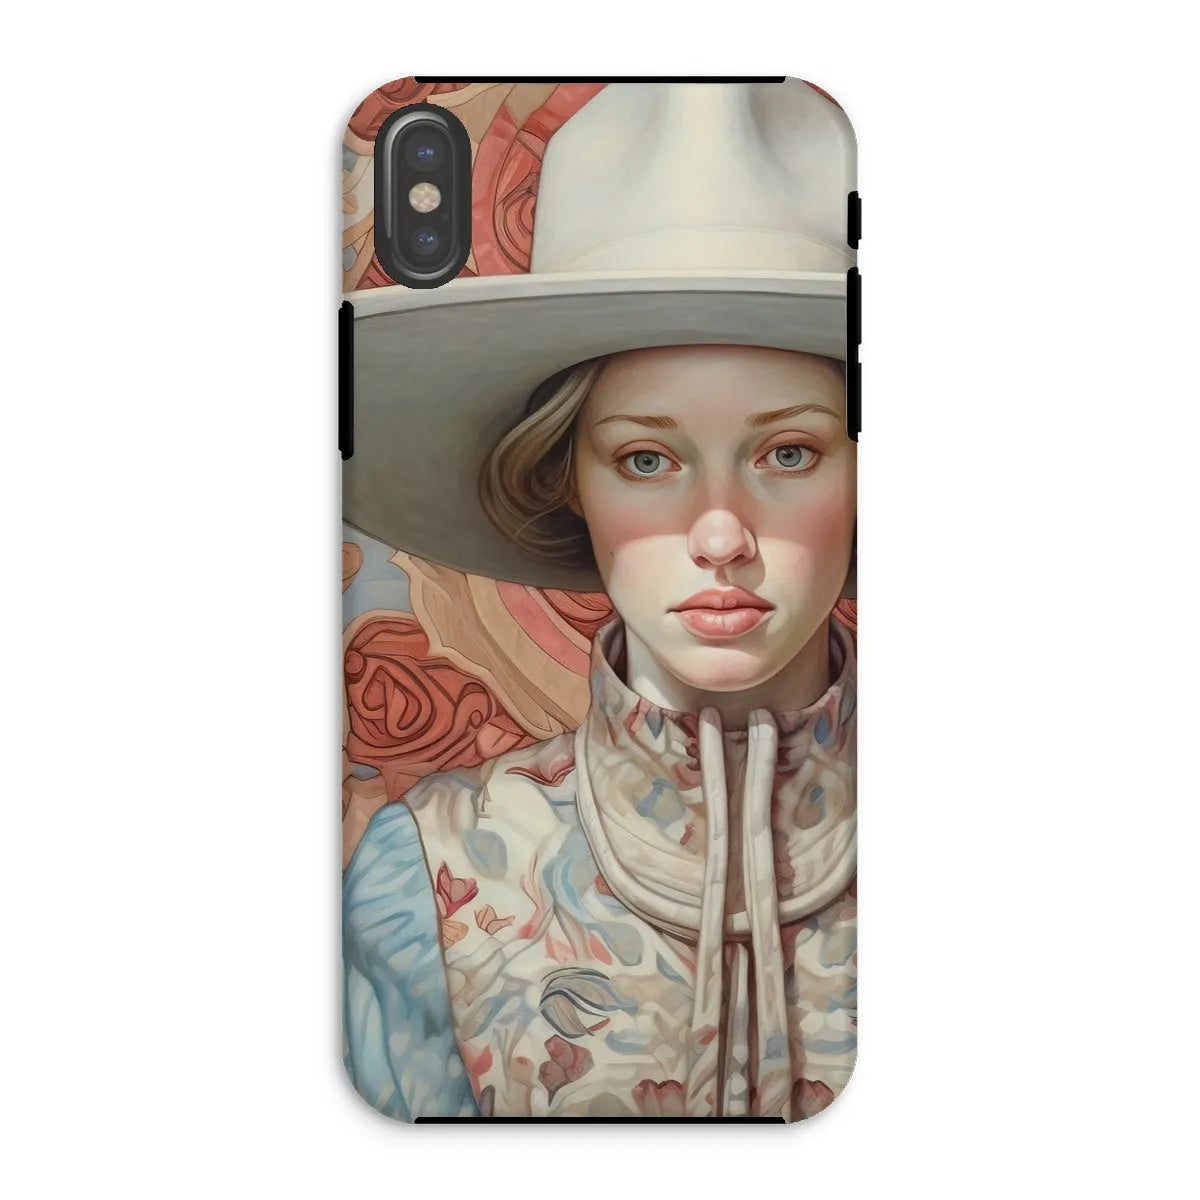 Lottie The Lesbian Cowgirl - Sapphic Art Phone Case - Iphone Xs / Matte - Mobile Phone Cases - Aesthetic Art